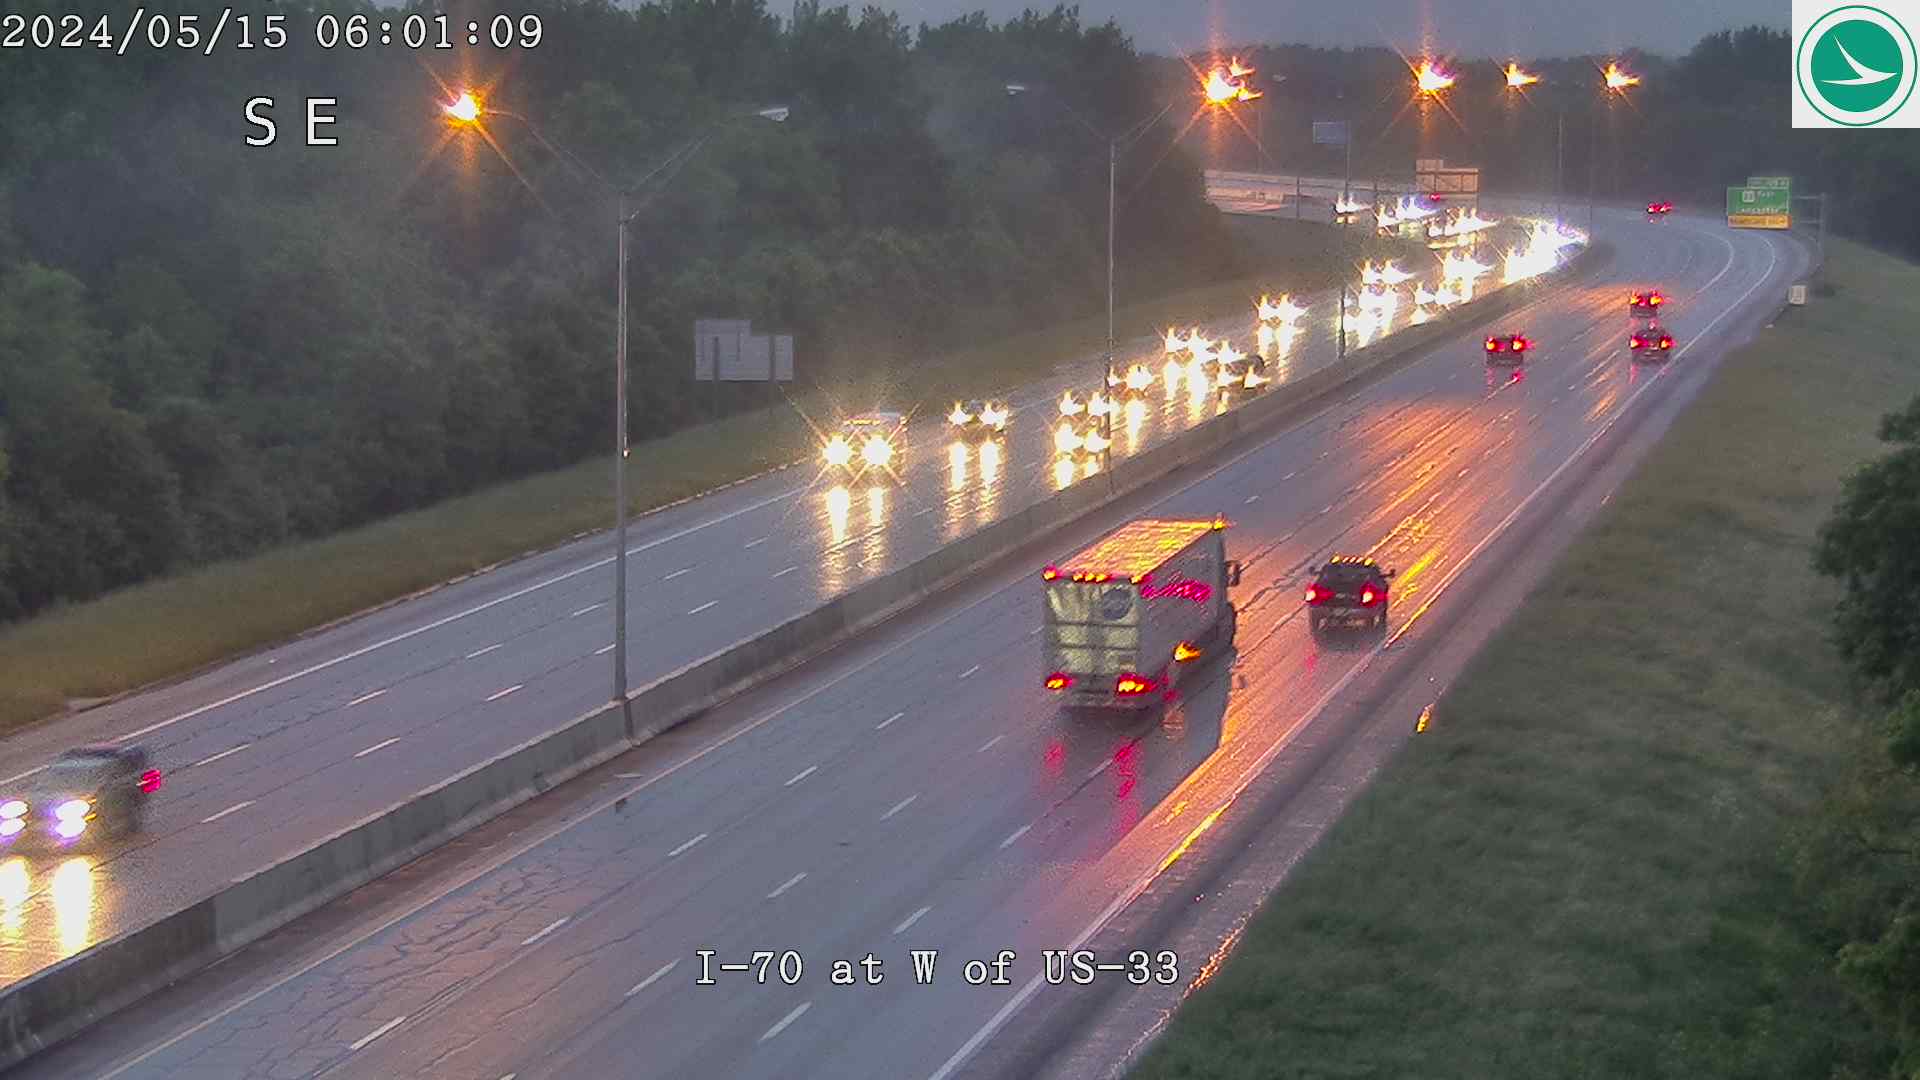 Traffic Cam I-70 at W of US-33